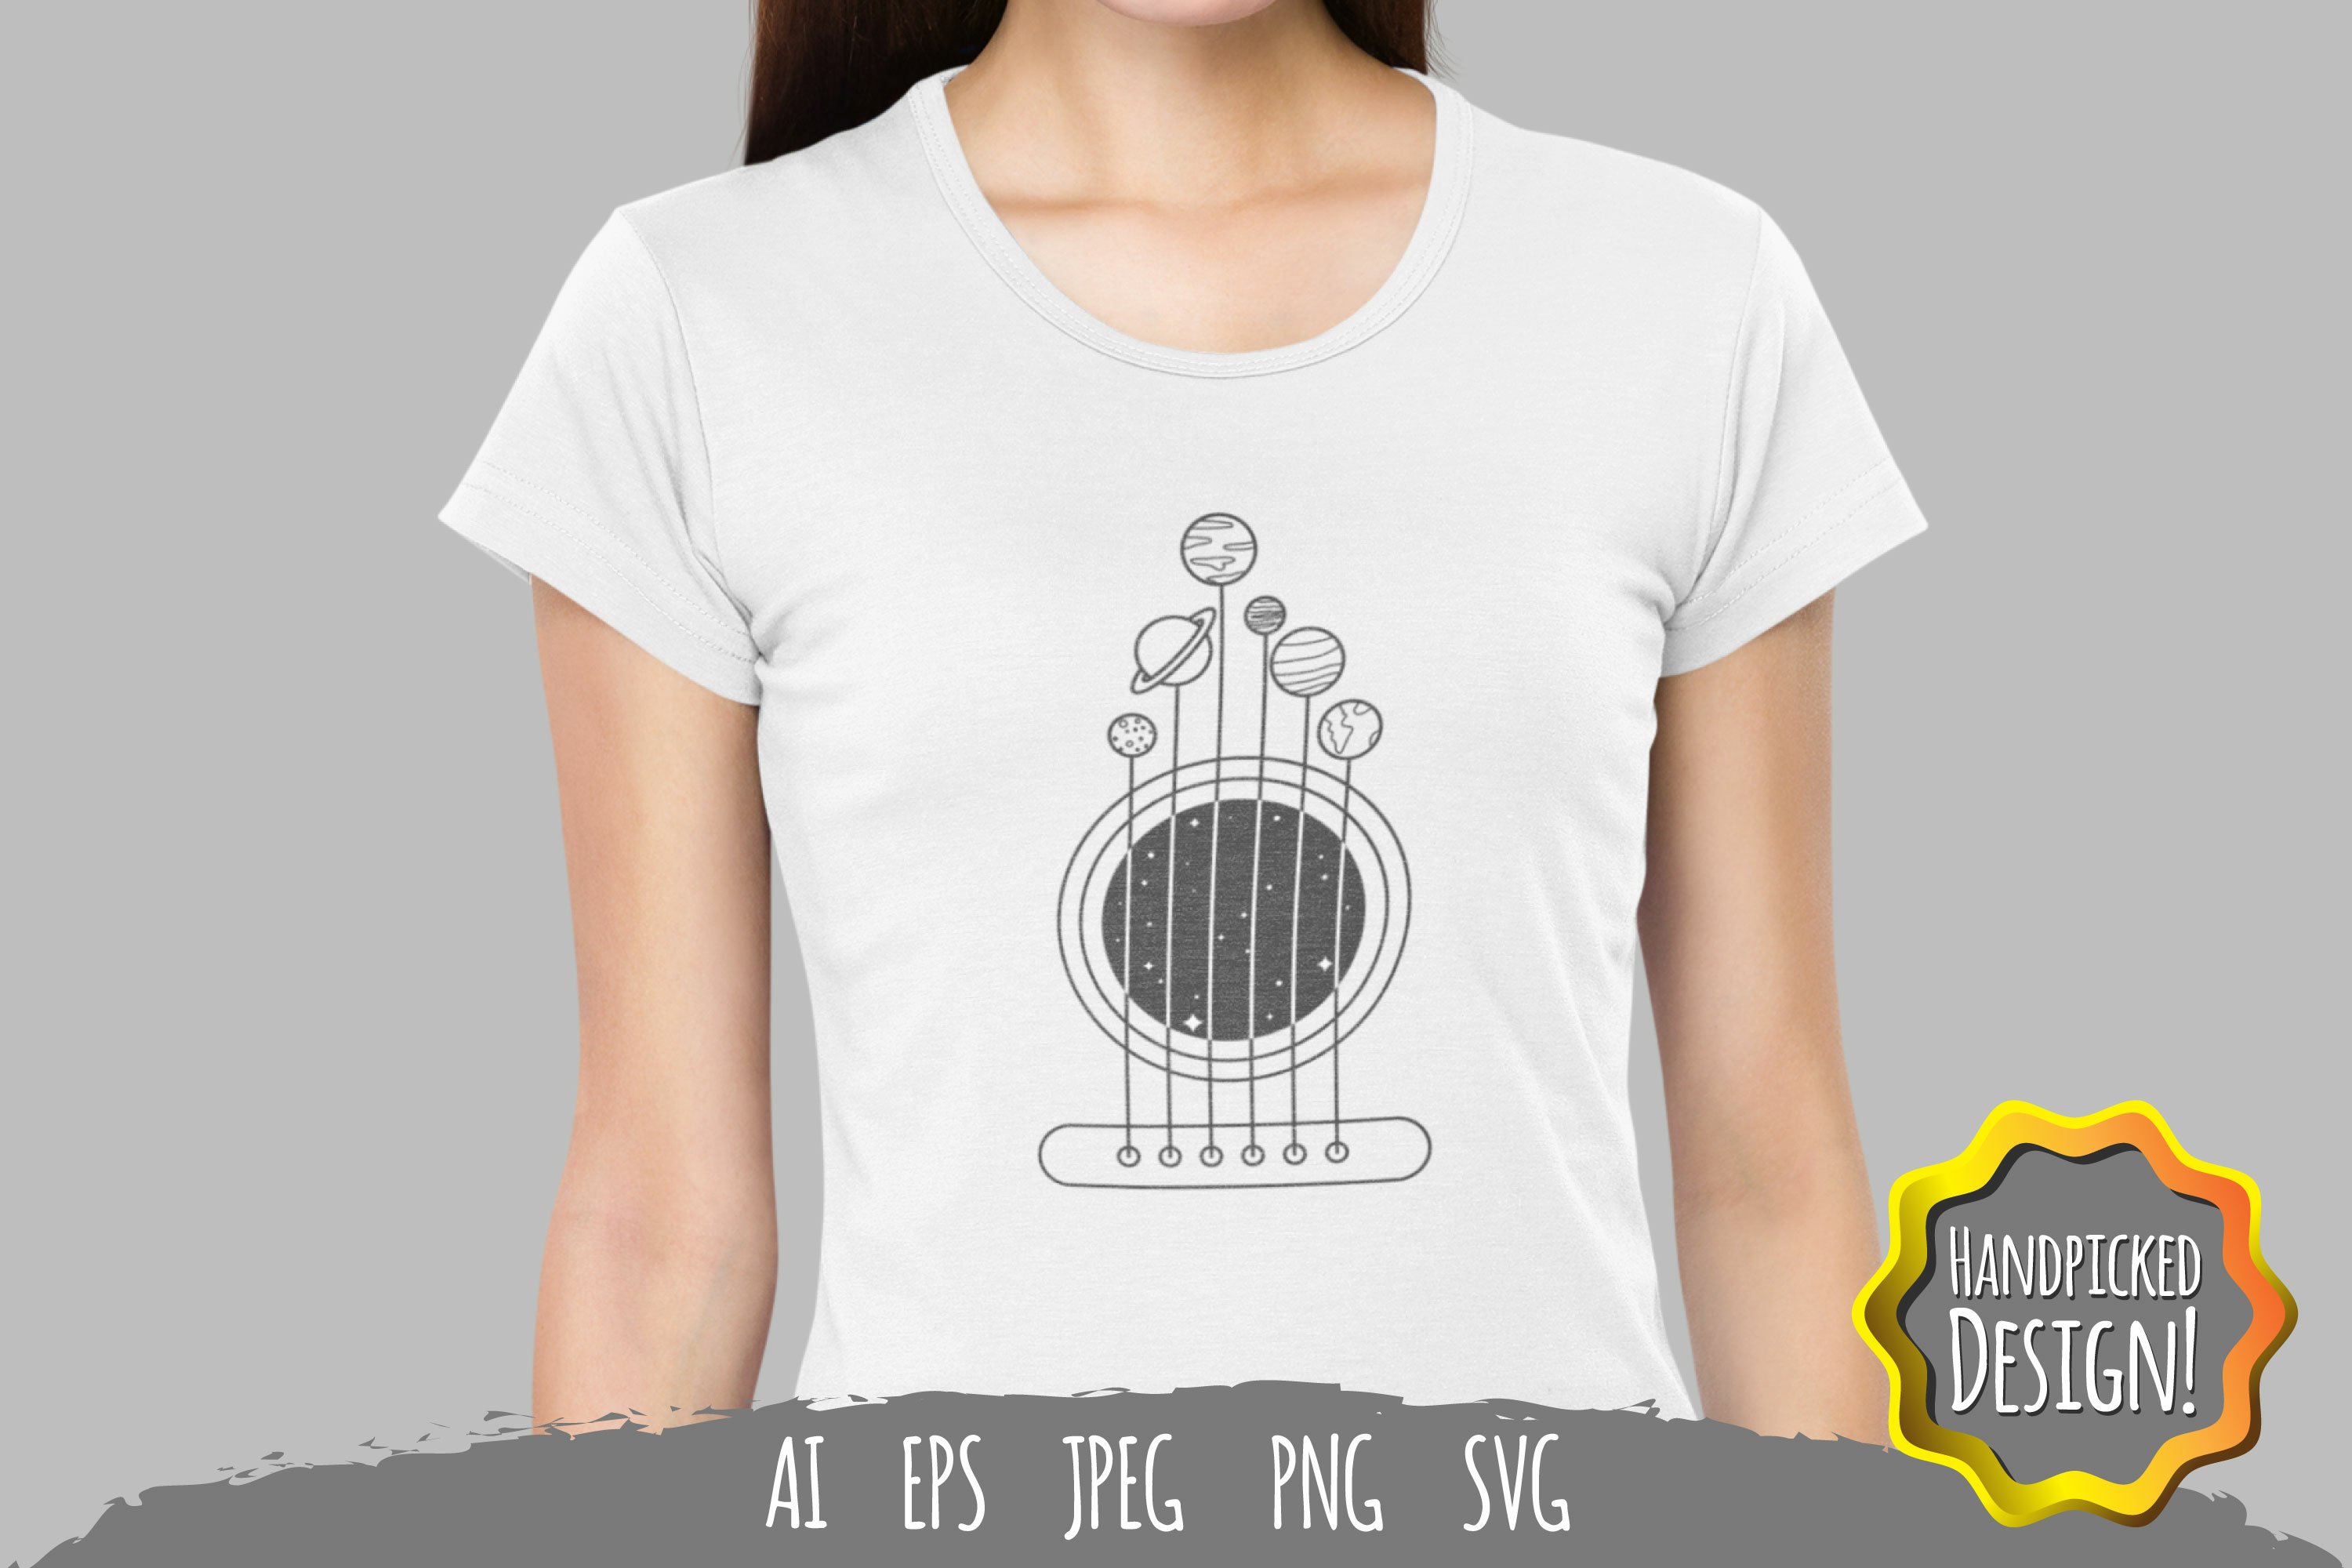 Prints on a t-shirt with guitar strings.